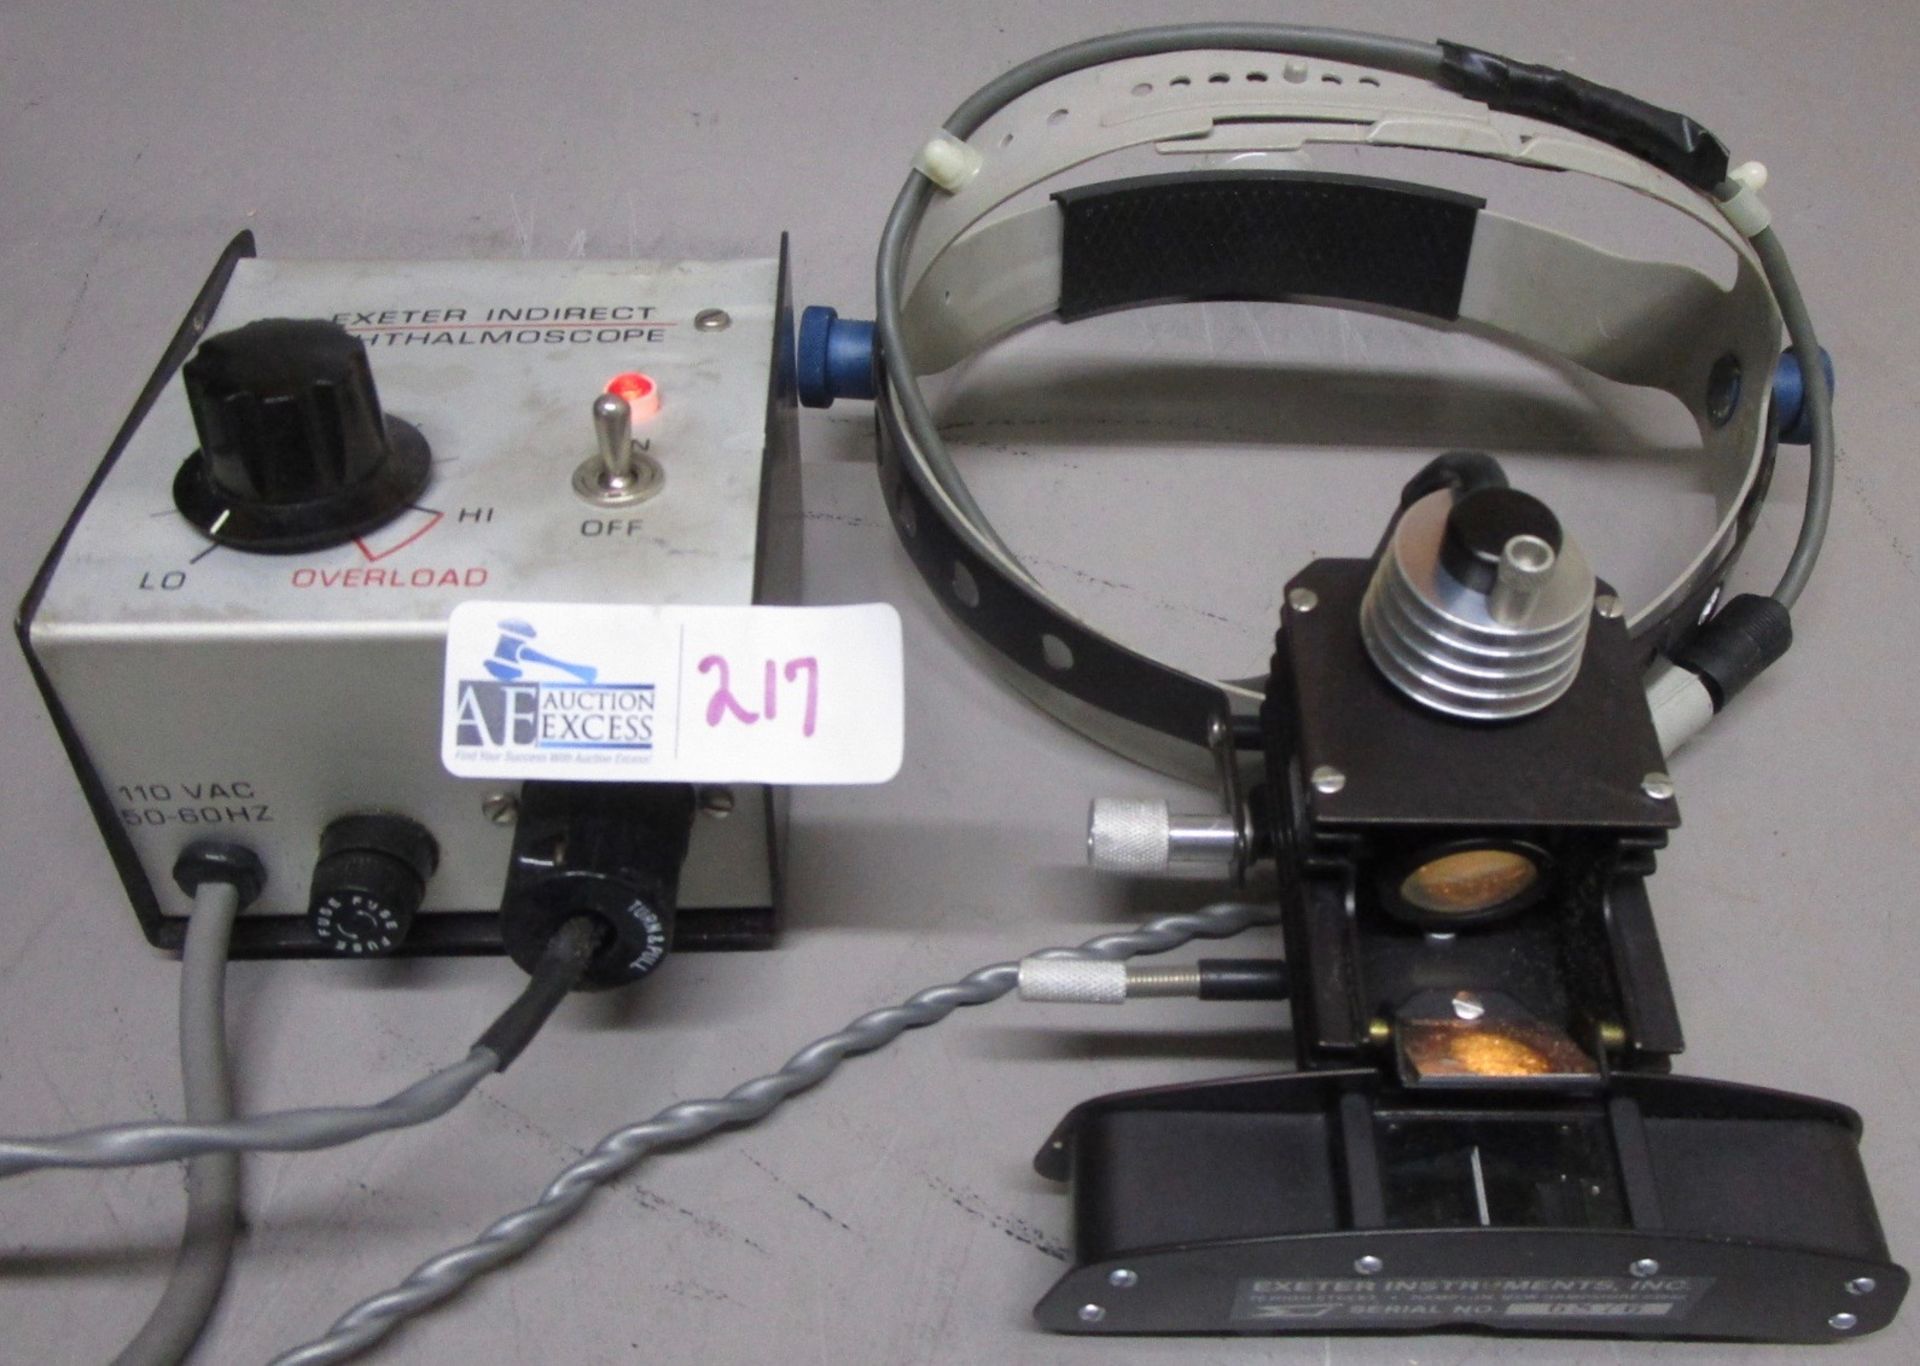 EXETER INDIRECT OPTHALMOSCOPE IN CASE - Image 2 of 3